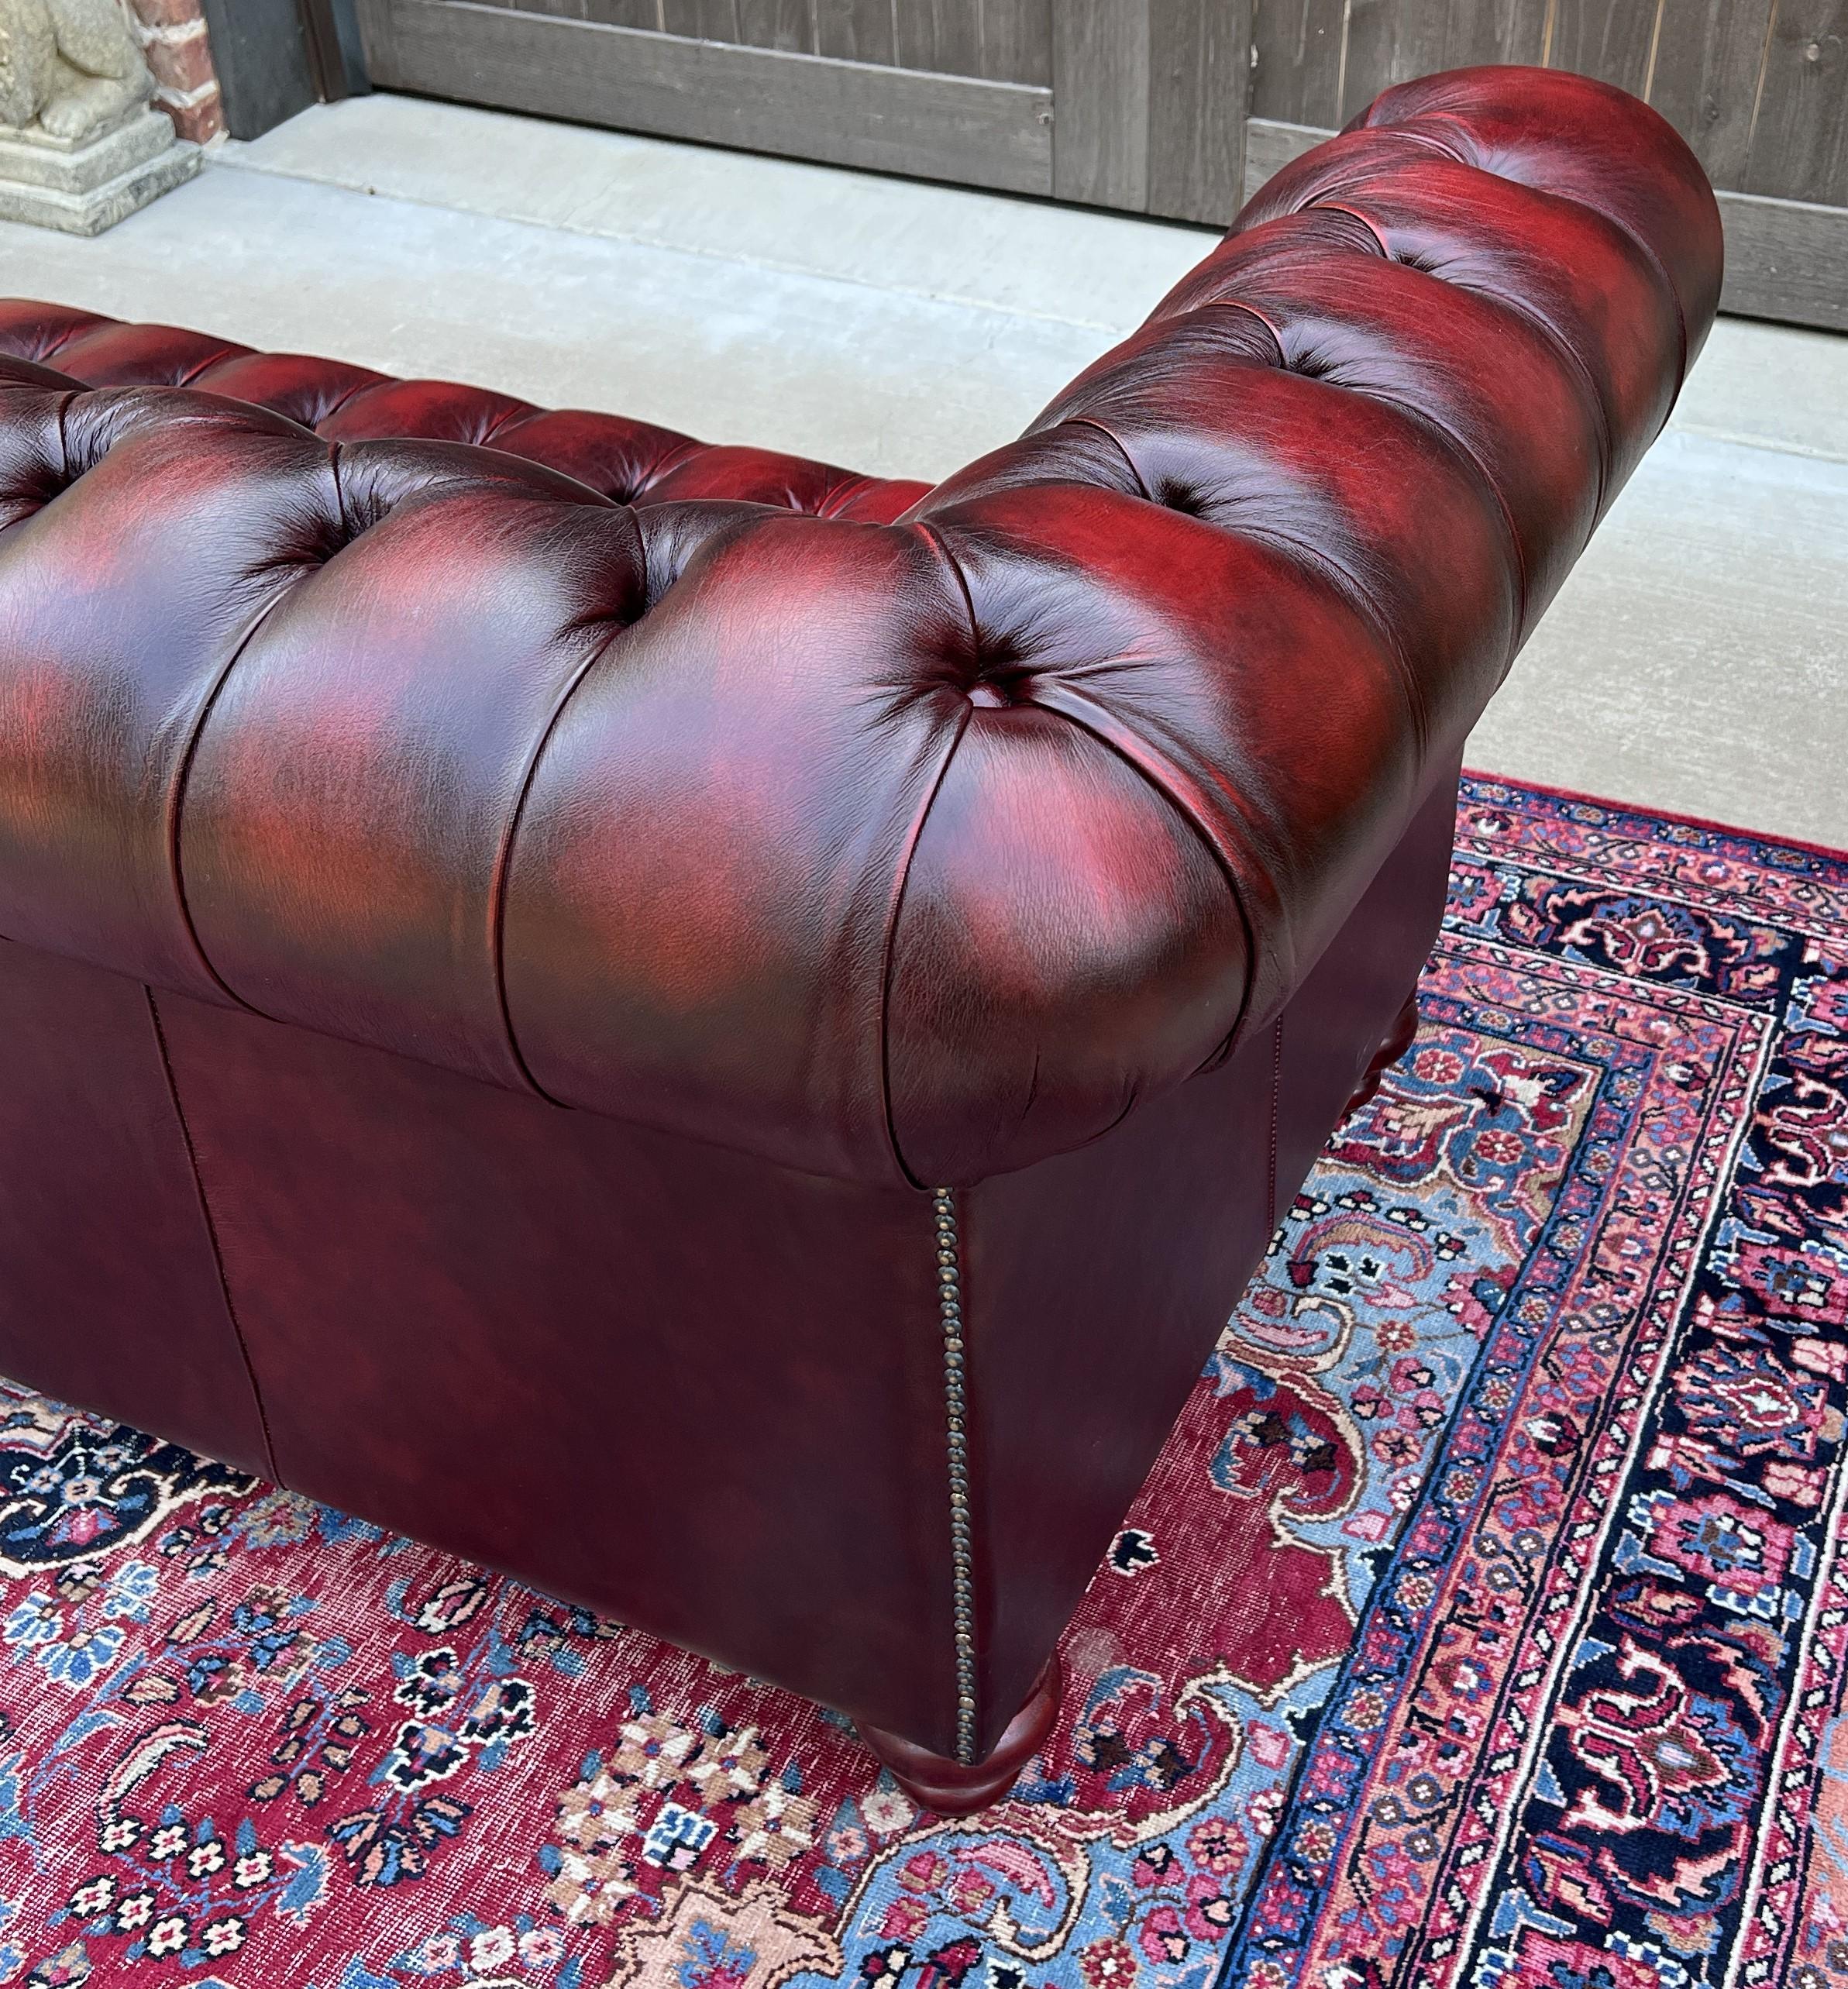 Vintage English Chesterfield Leather Sofa Tufted Seat Oxblood Red Mid-Century #2 12